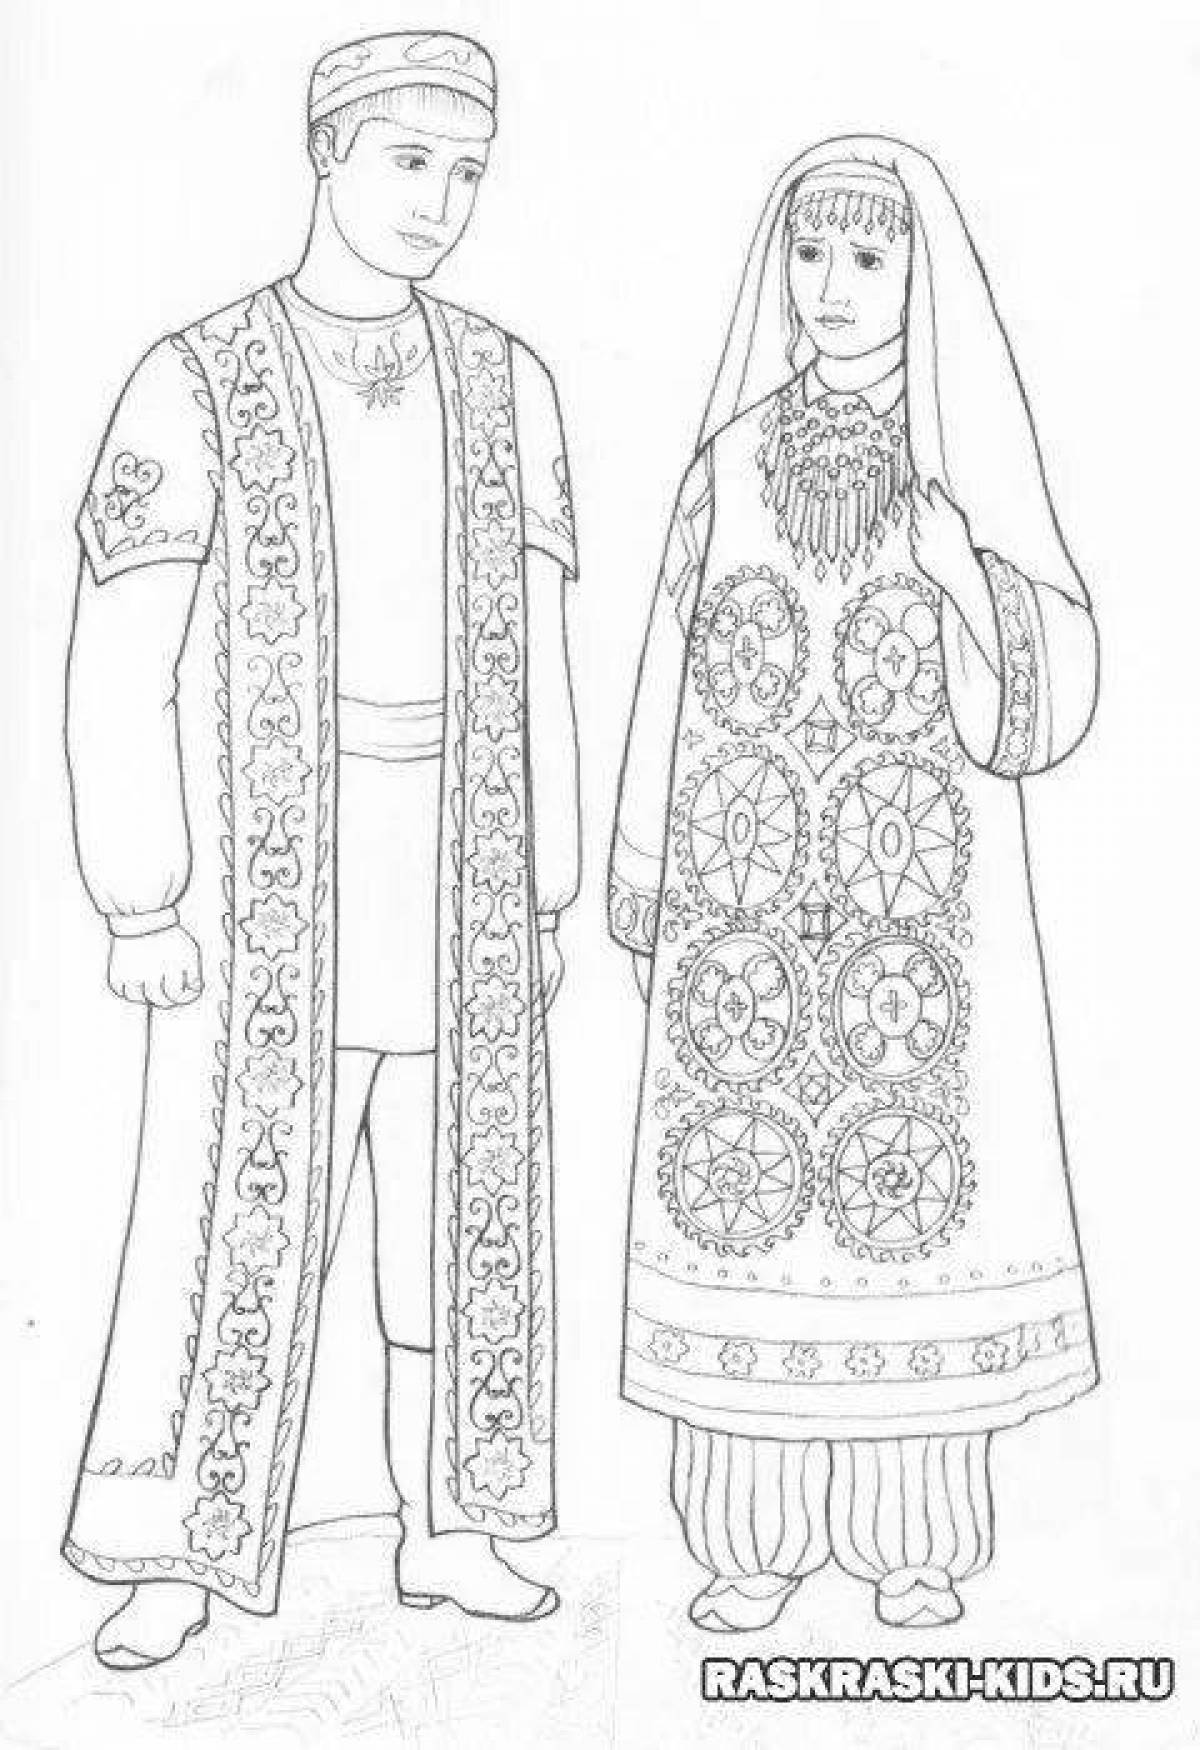 Coloring page glorious national costume